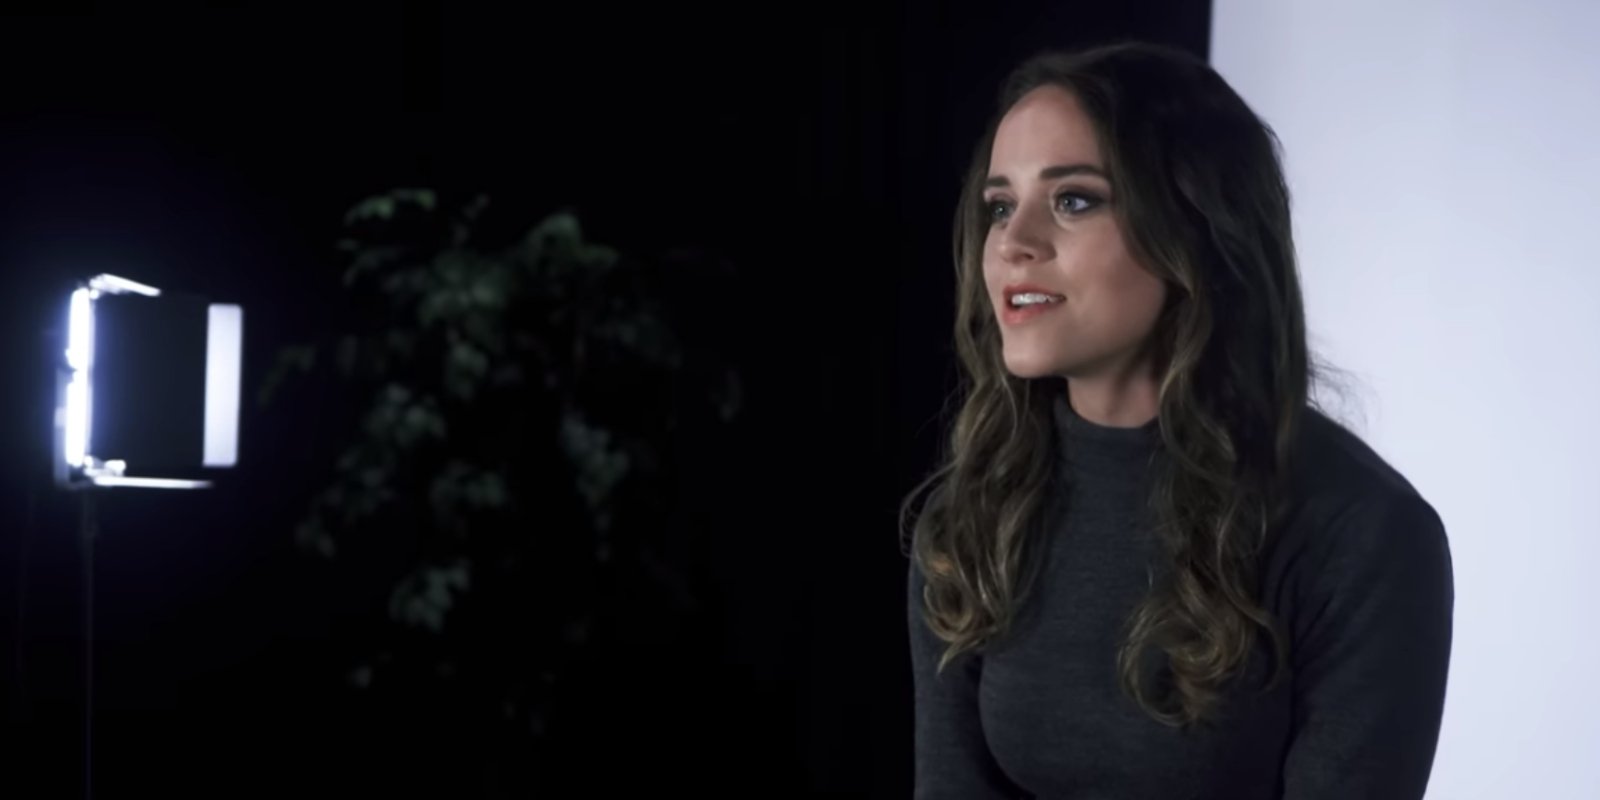 Jinger Vuolo discusses her new book 'Becoming Free Indeed.' in a YouTube video